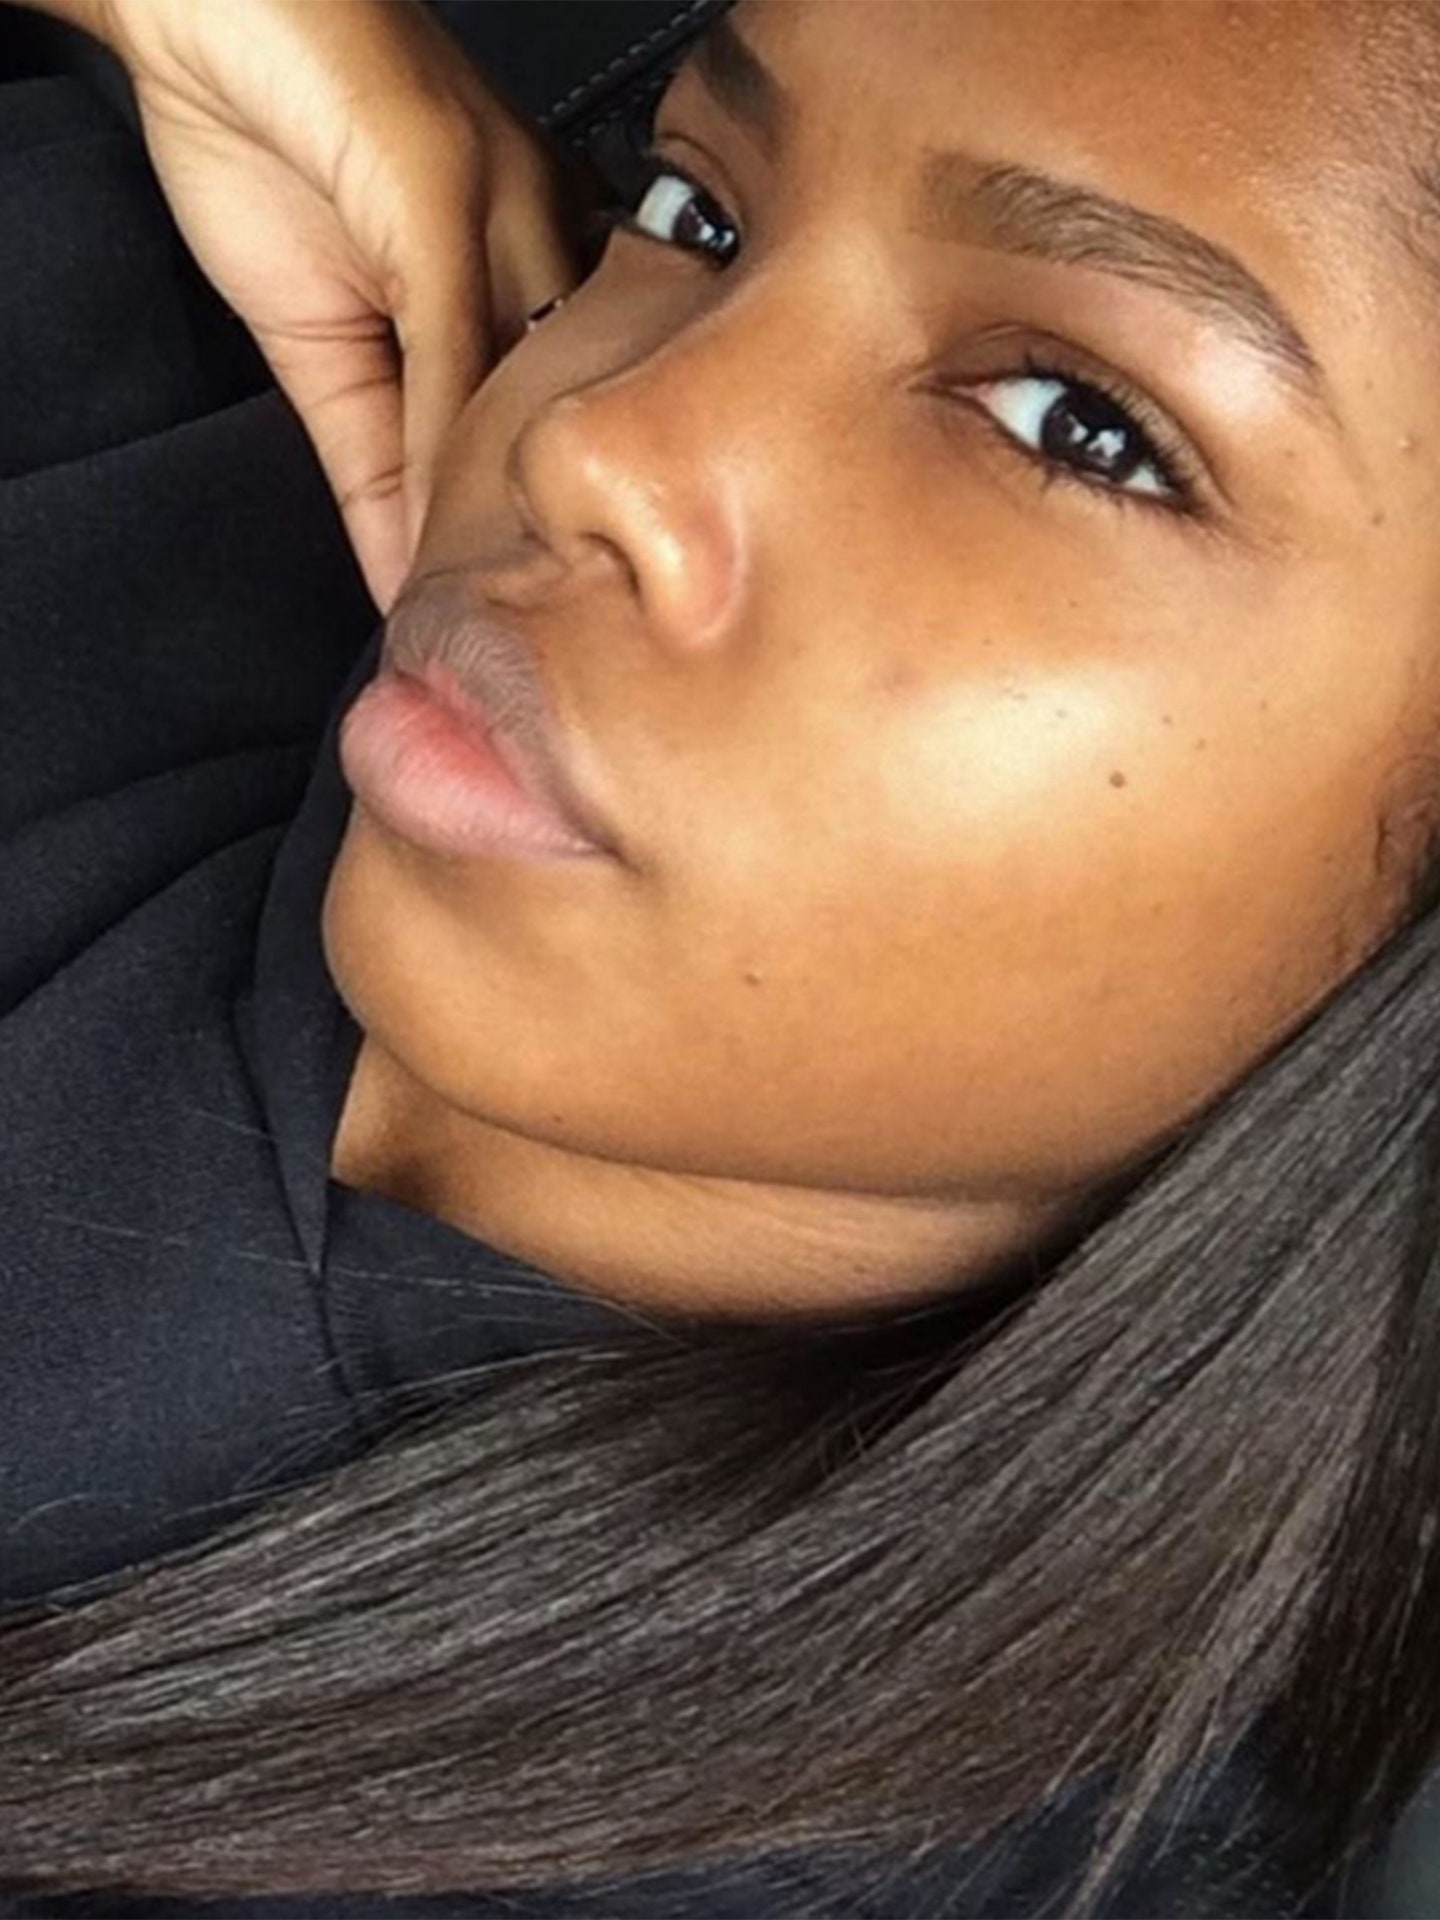 Ryan destiny gets candid about her skin on social media glamour